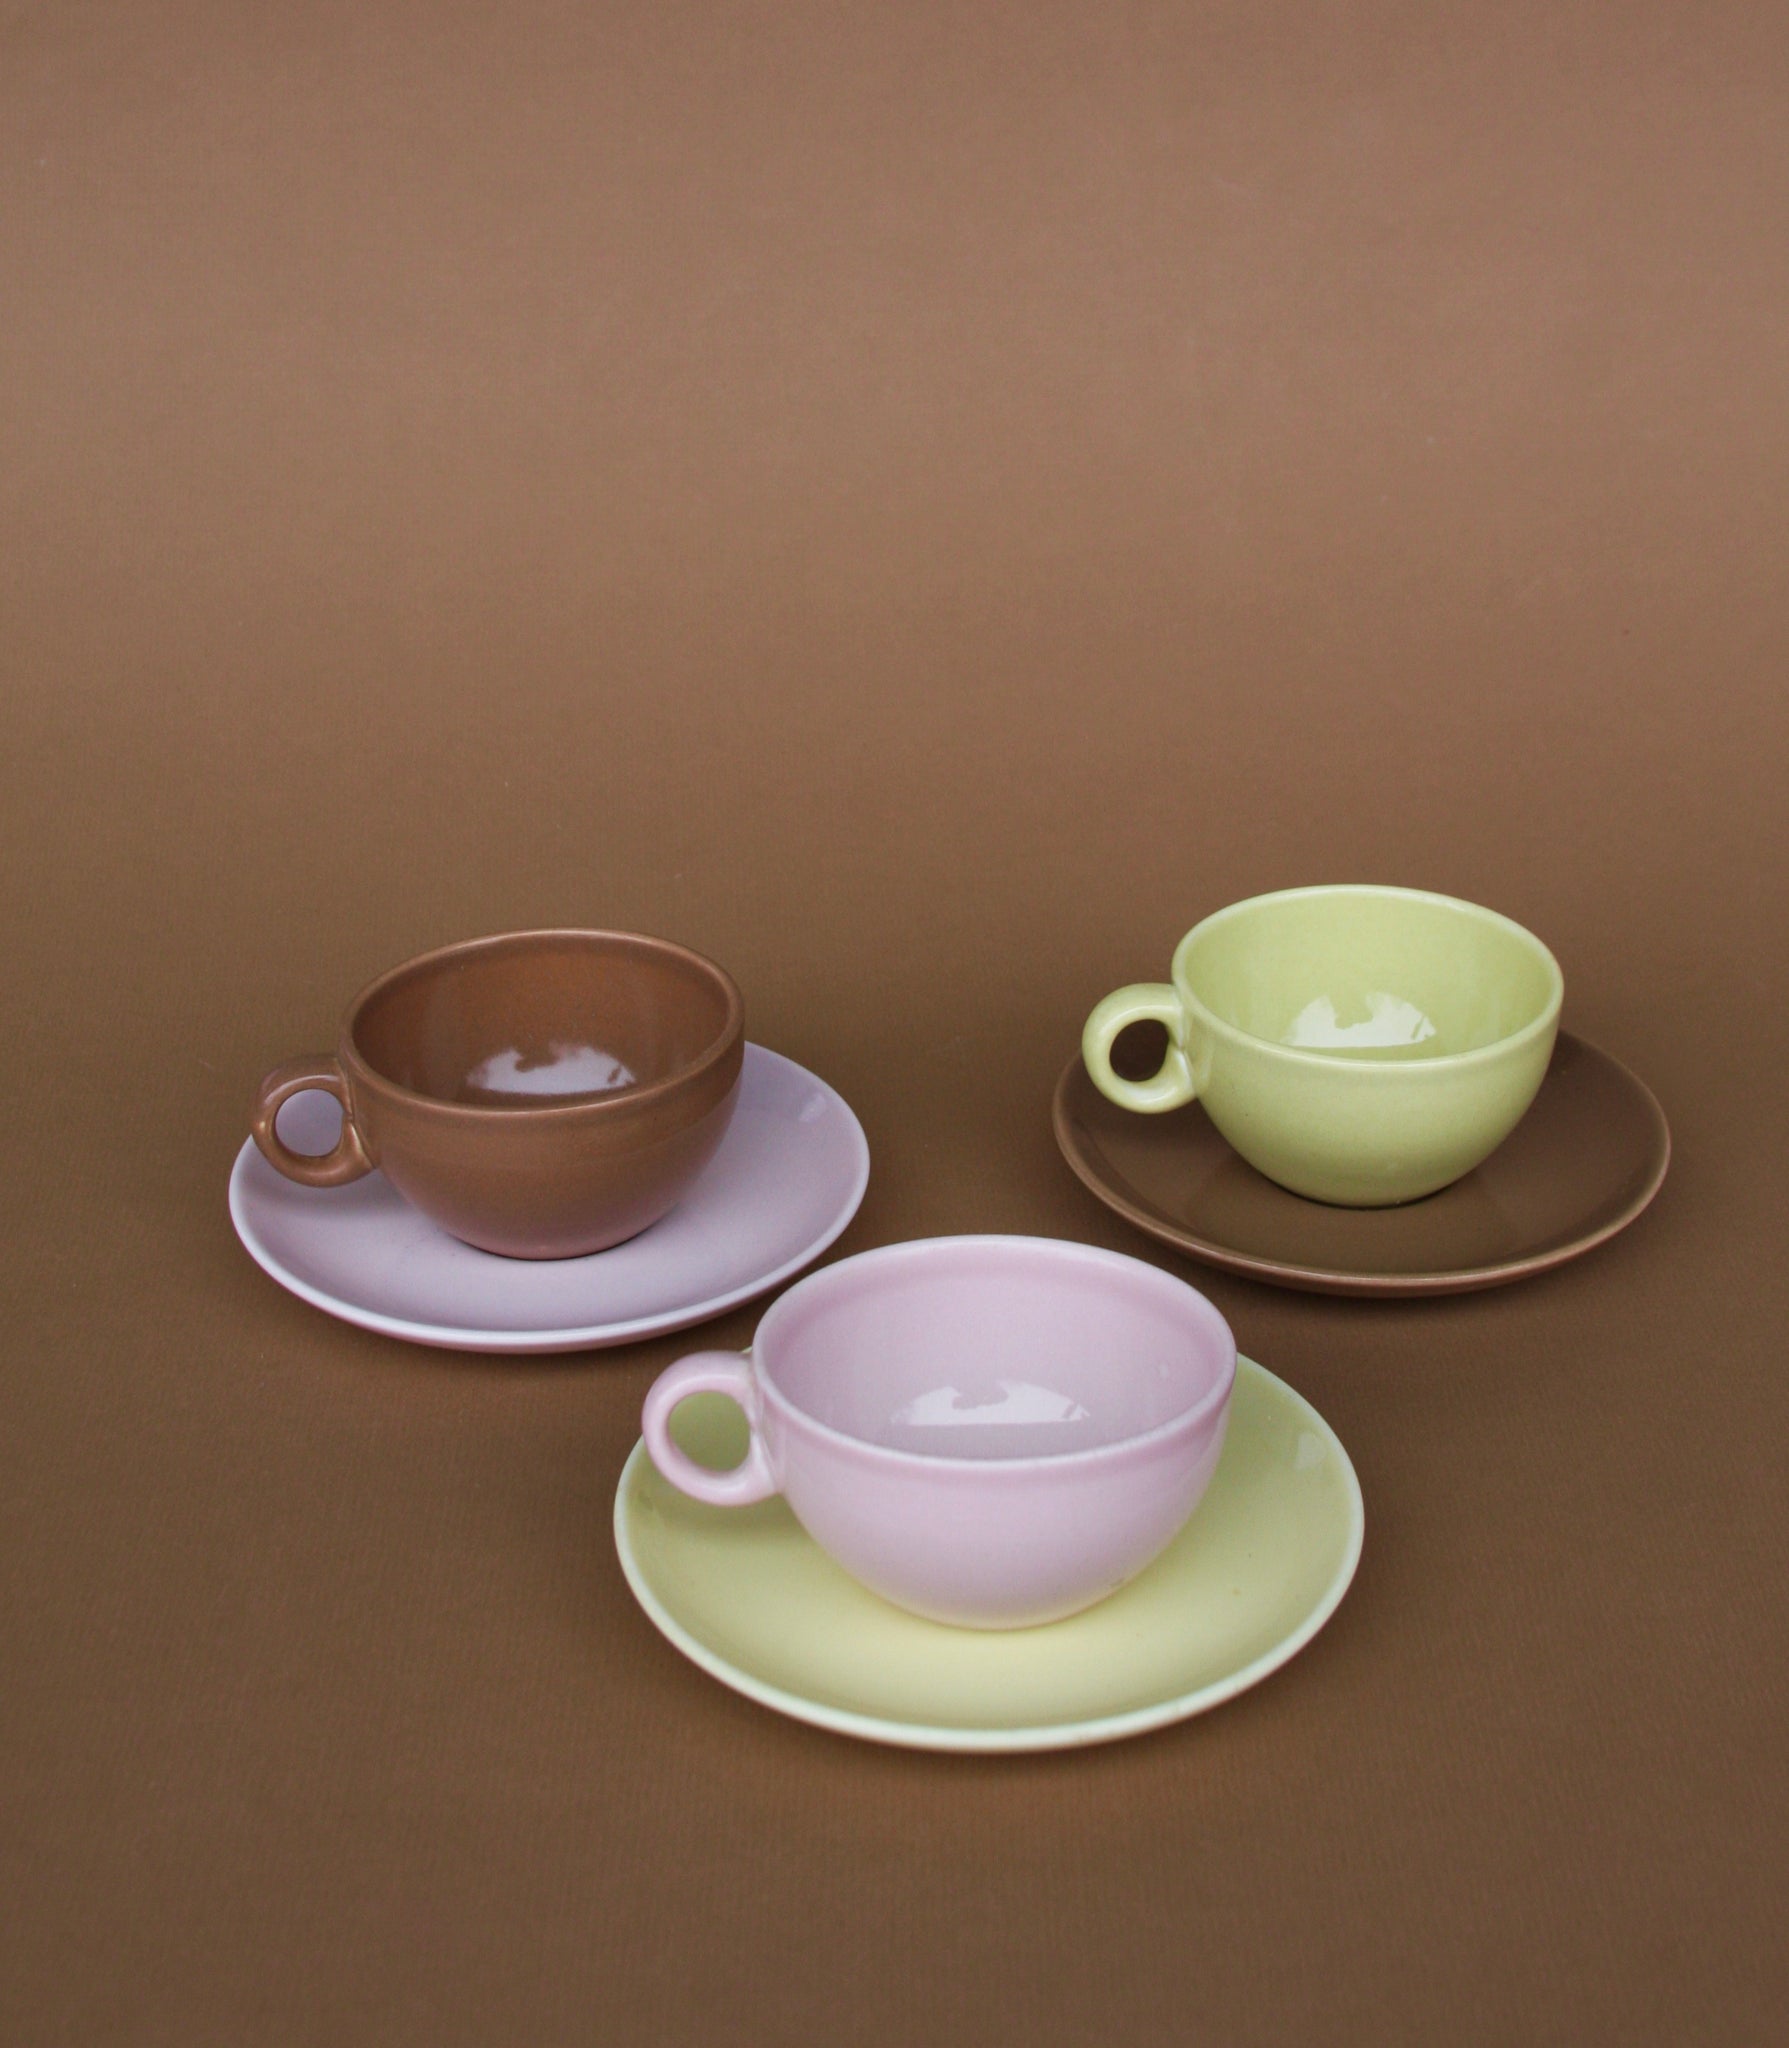 Set of 3 Neapolitan Tea or Coffee Cups and Saucer